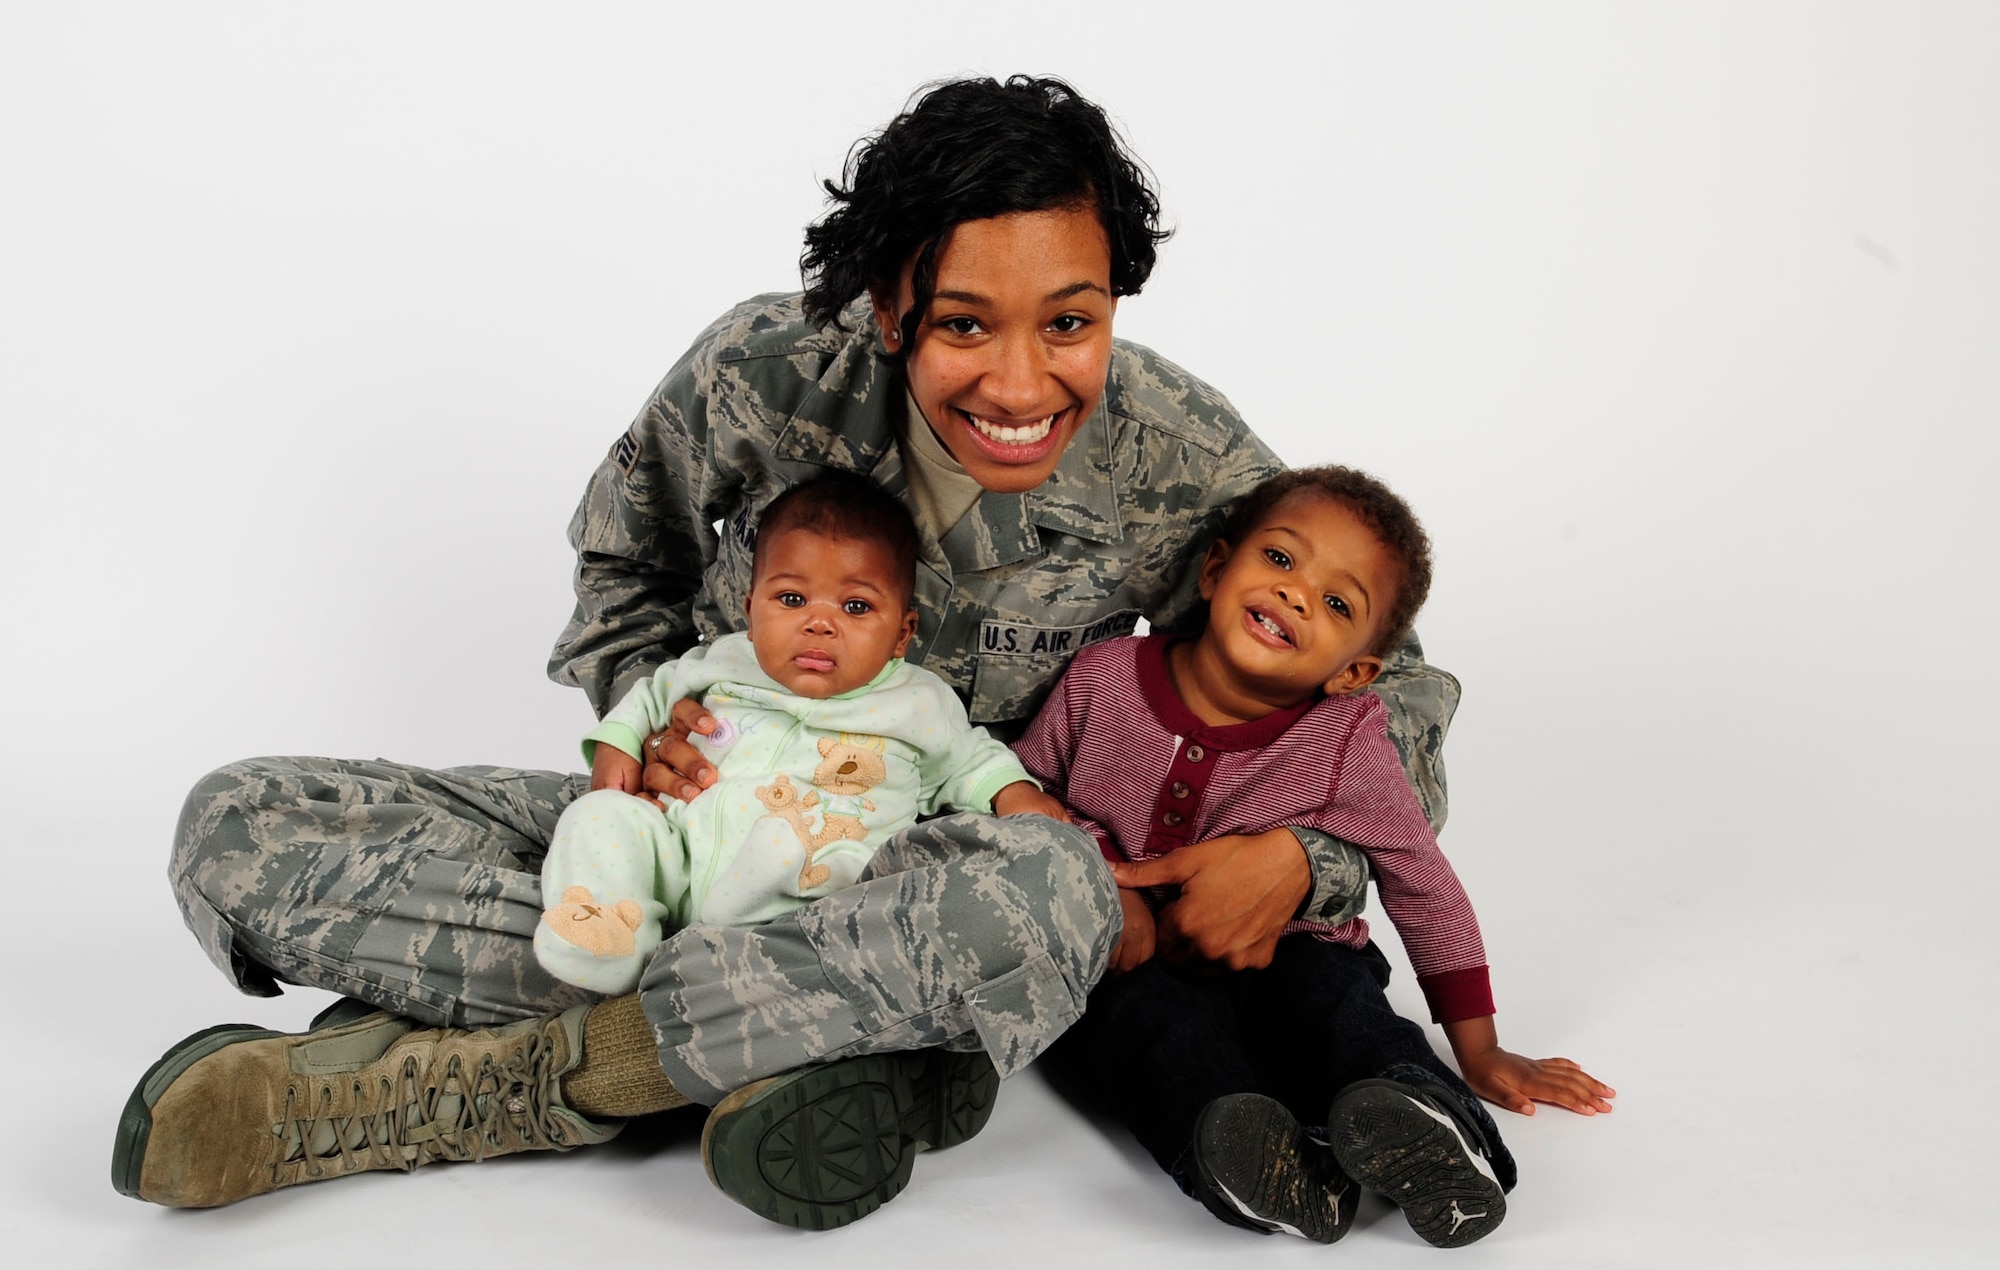 Senior Airman Jenay Randolph, 6th Air Mobility Wing Public Affairs photojournalist, poses for a picture with her children Nov. 25, 2013 at MacDill Air Force Base, Fla. Randolph is the mother of two under the age of two that finds the balance between single motherhood and active-duty Air Force.The son, Jaylen Brown, is 17 months and the daughter, Jordyn, is four months.(U.S. Air Force photo by Senior Airman Shandresha Mitchell/Released) 